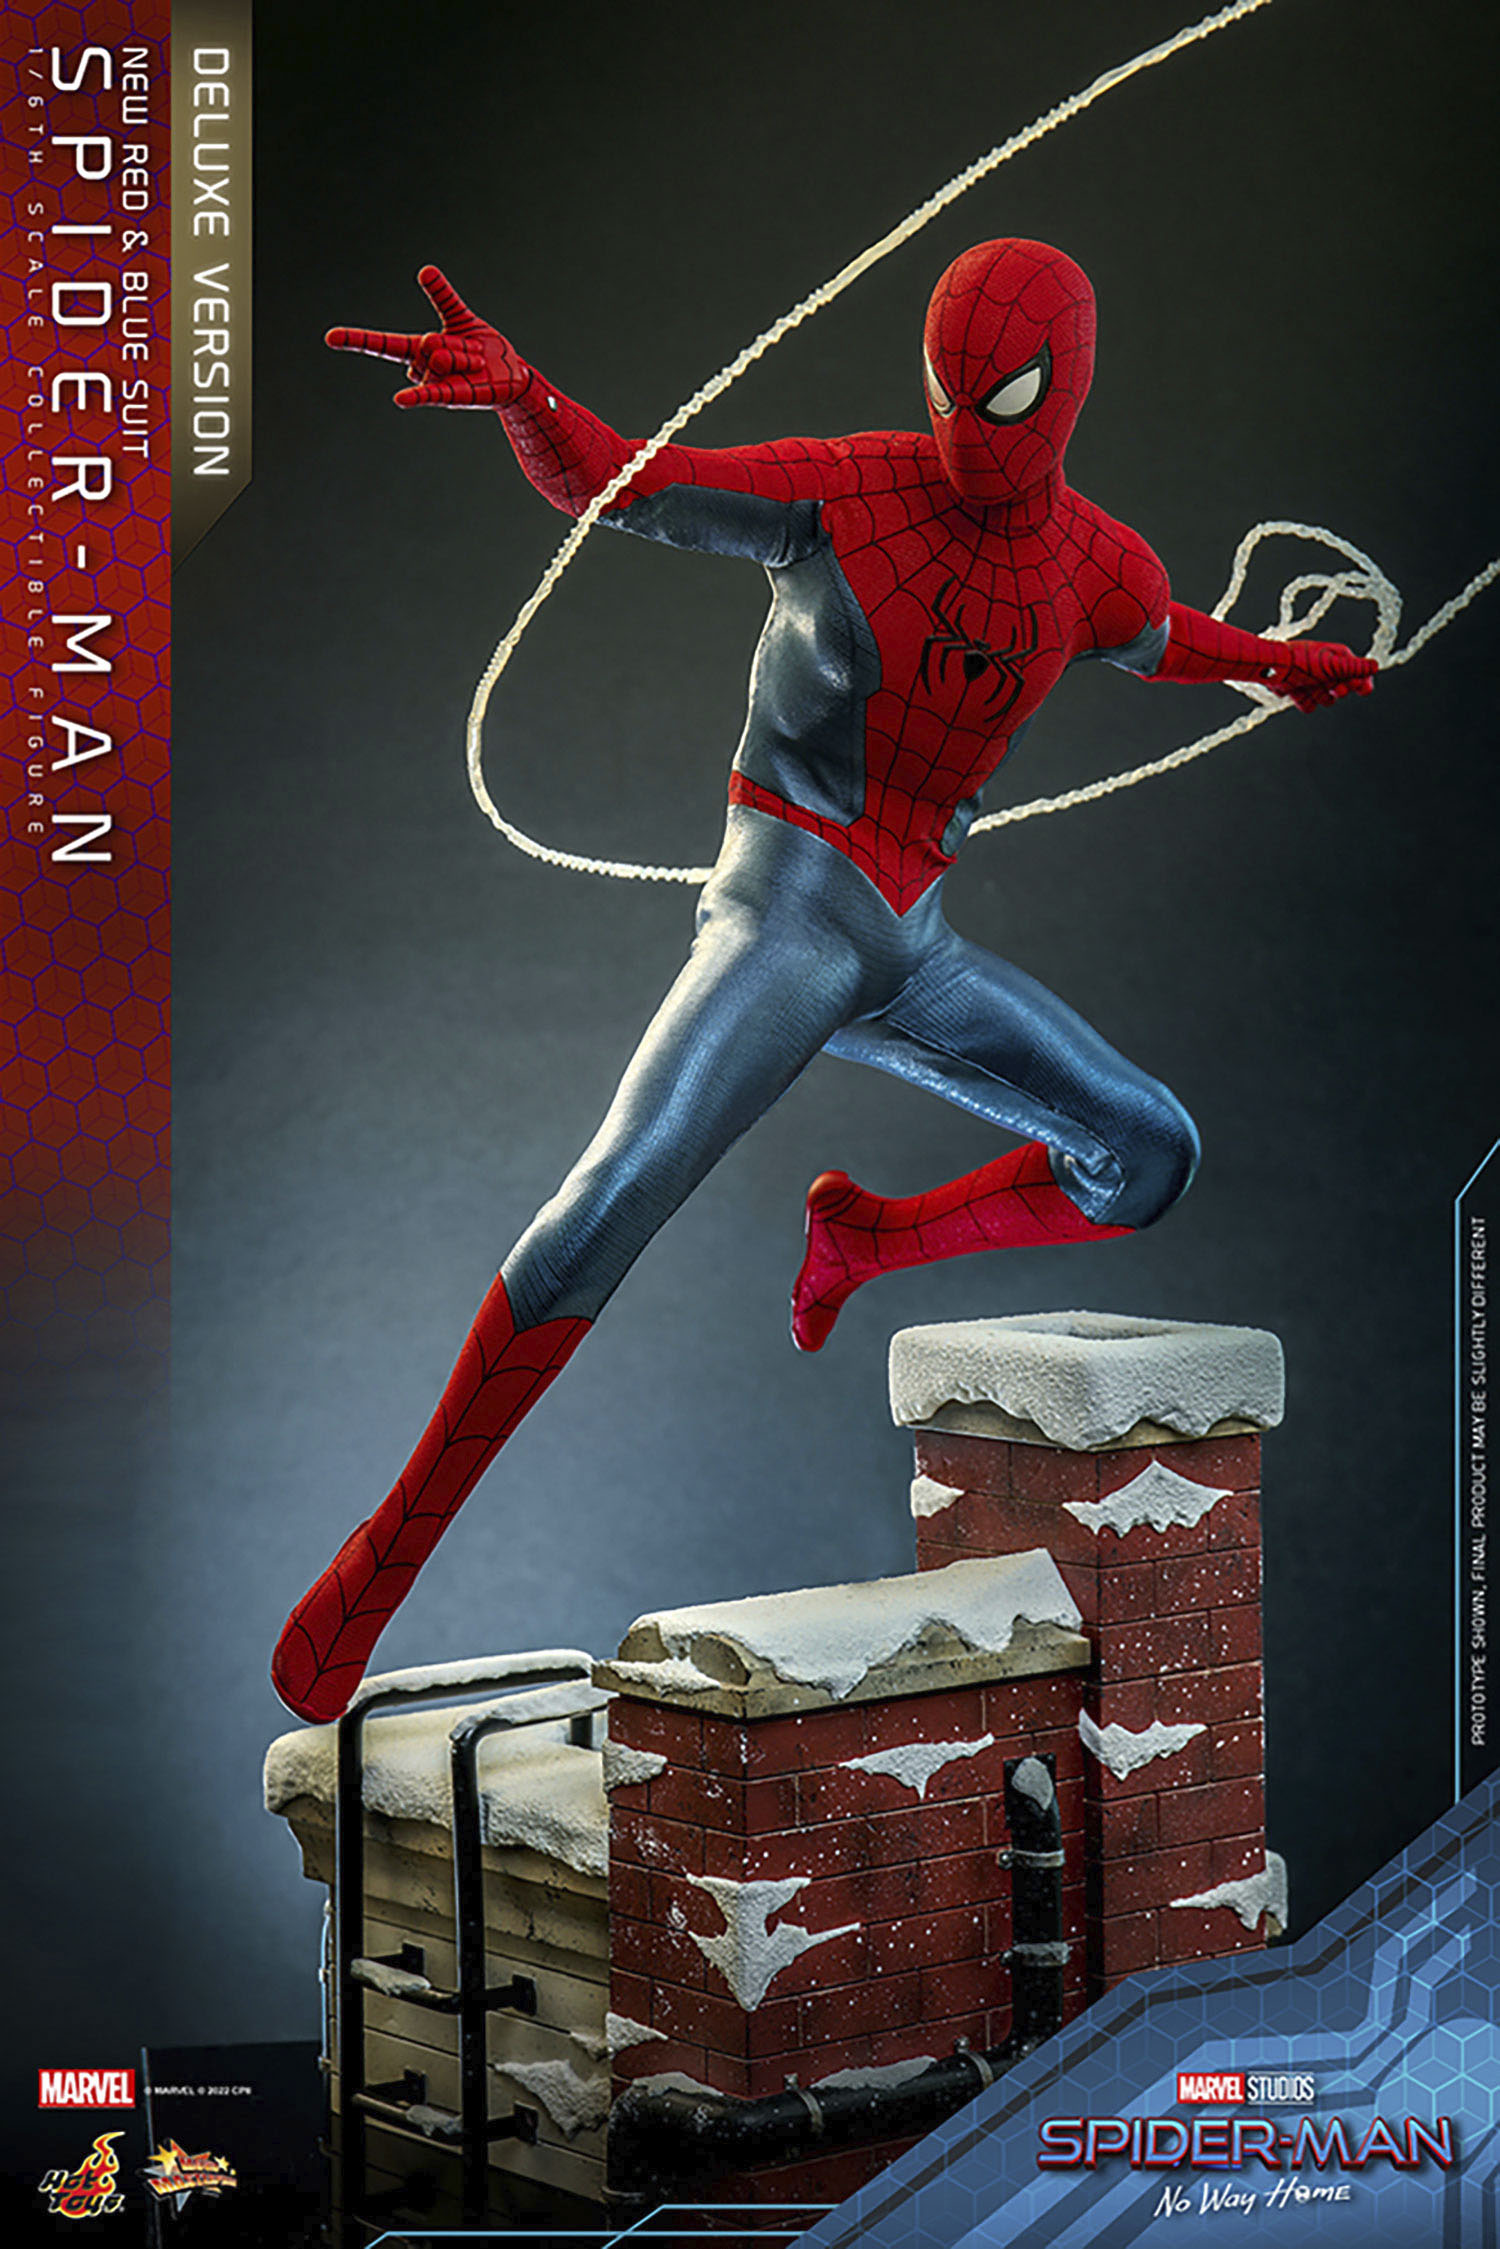 BE@RBRICK SPIDER-MAN UPGRADED SUIT 1000%